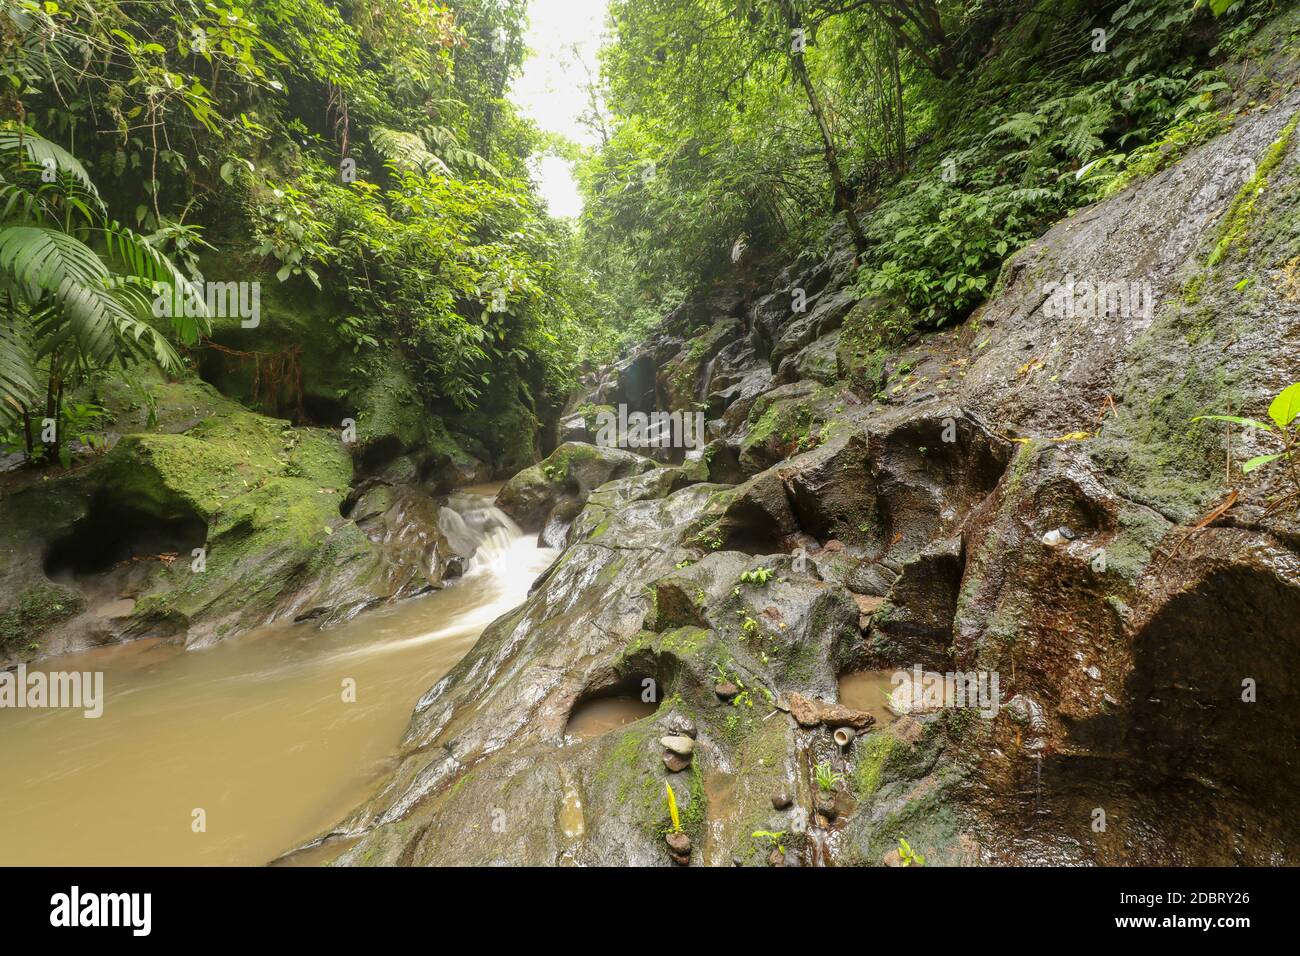 Beautiful texture of stone riverbed polished by mountain river flow surrounded by wild rainforest on a sunny summer day. Bali, Indonesia. Stock Photo